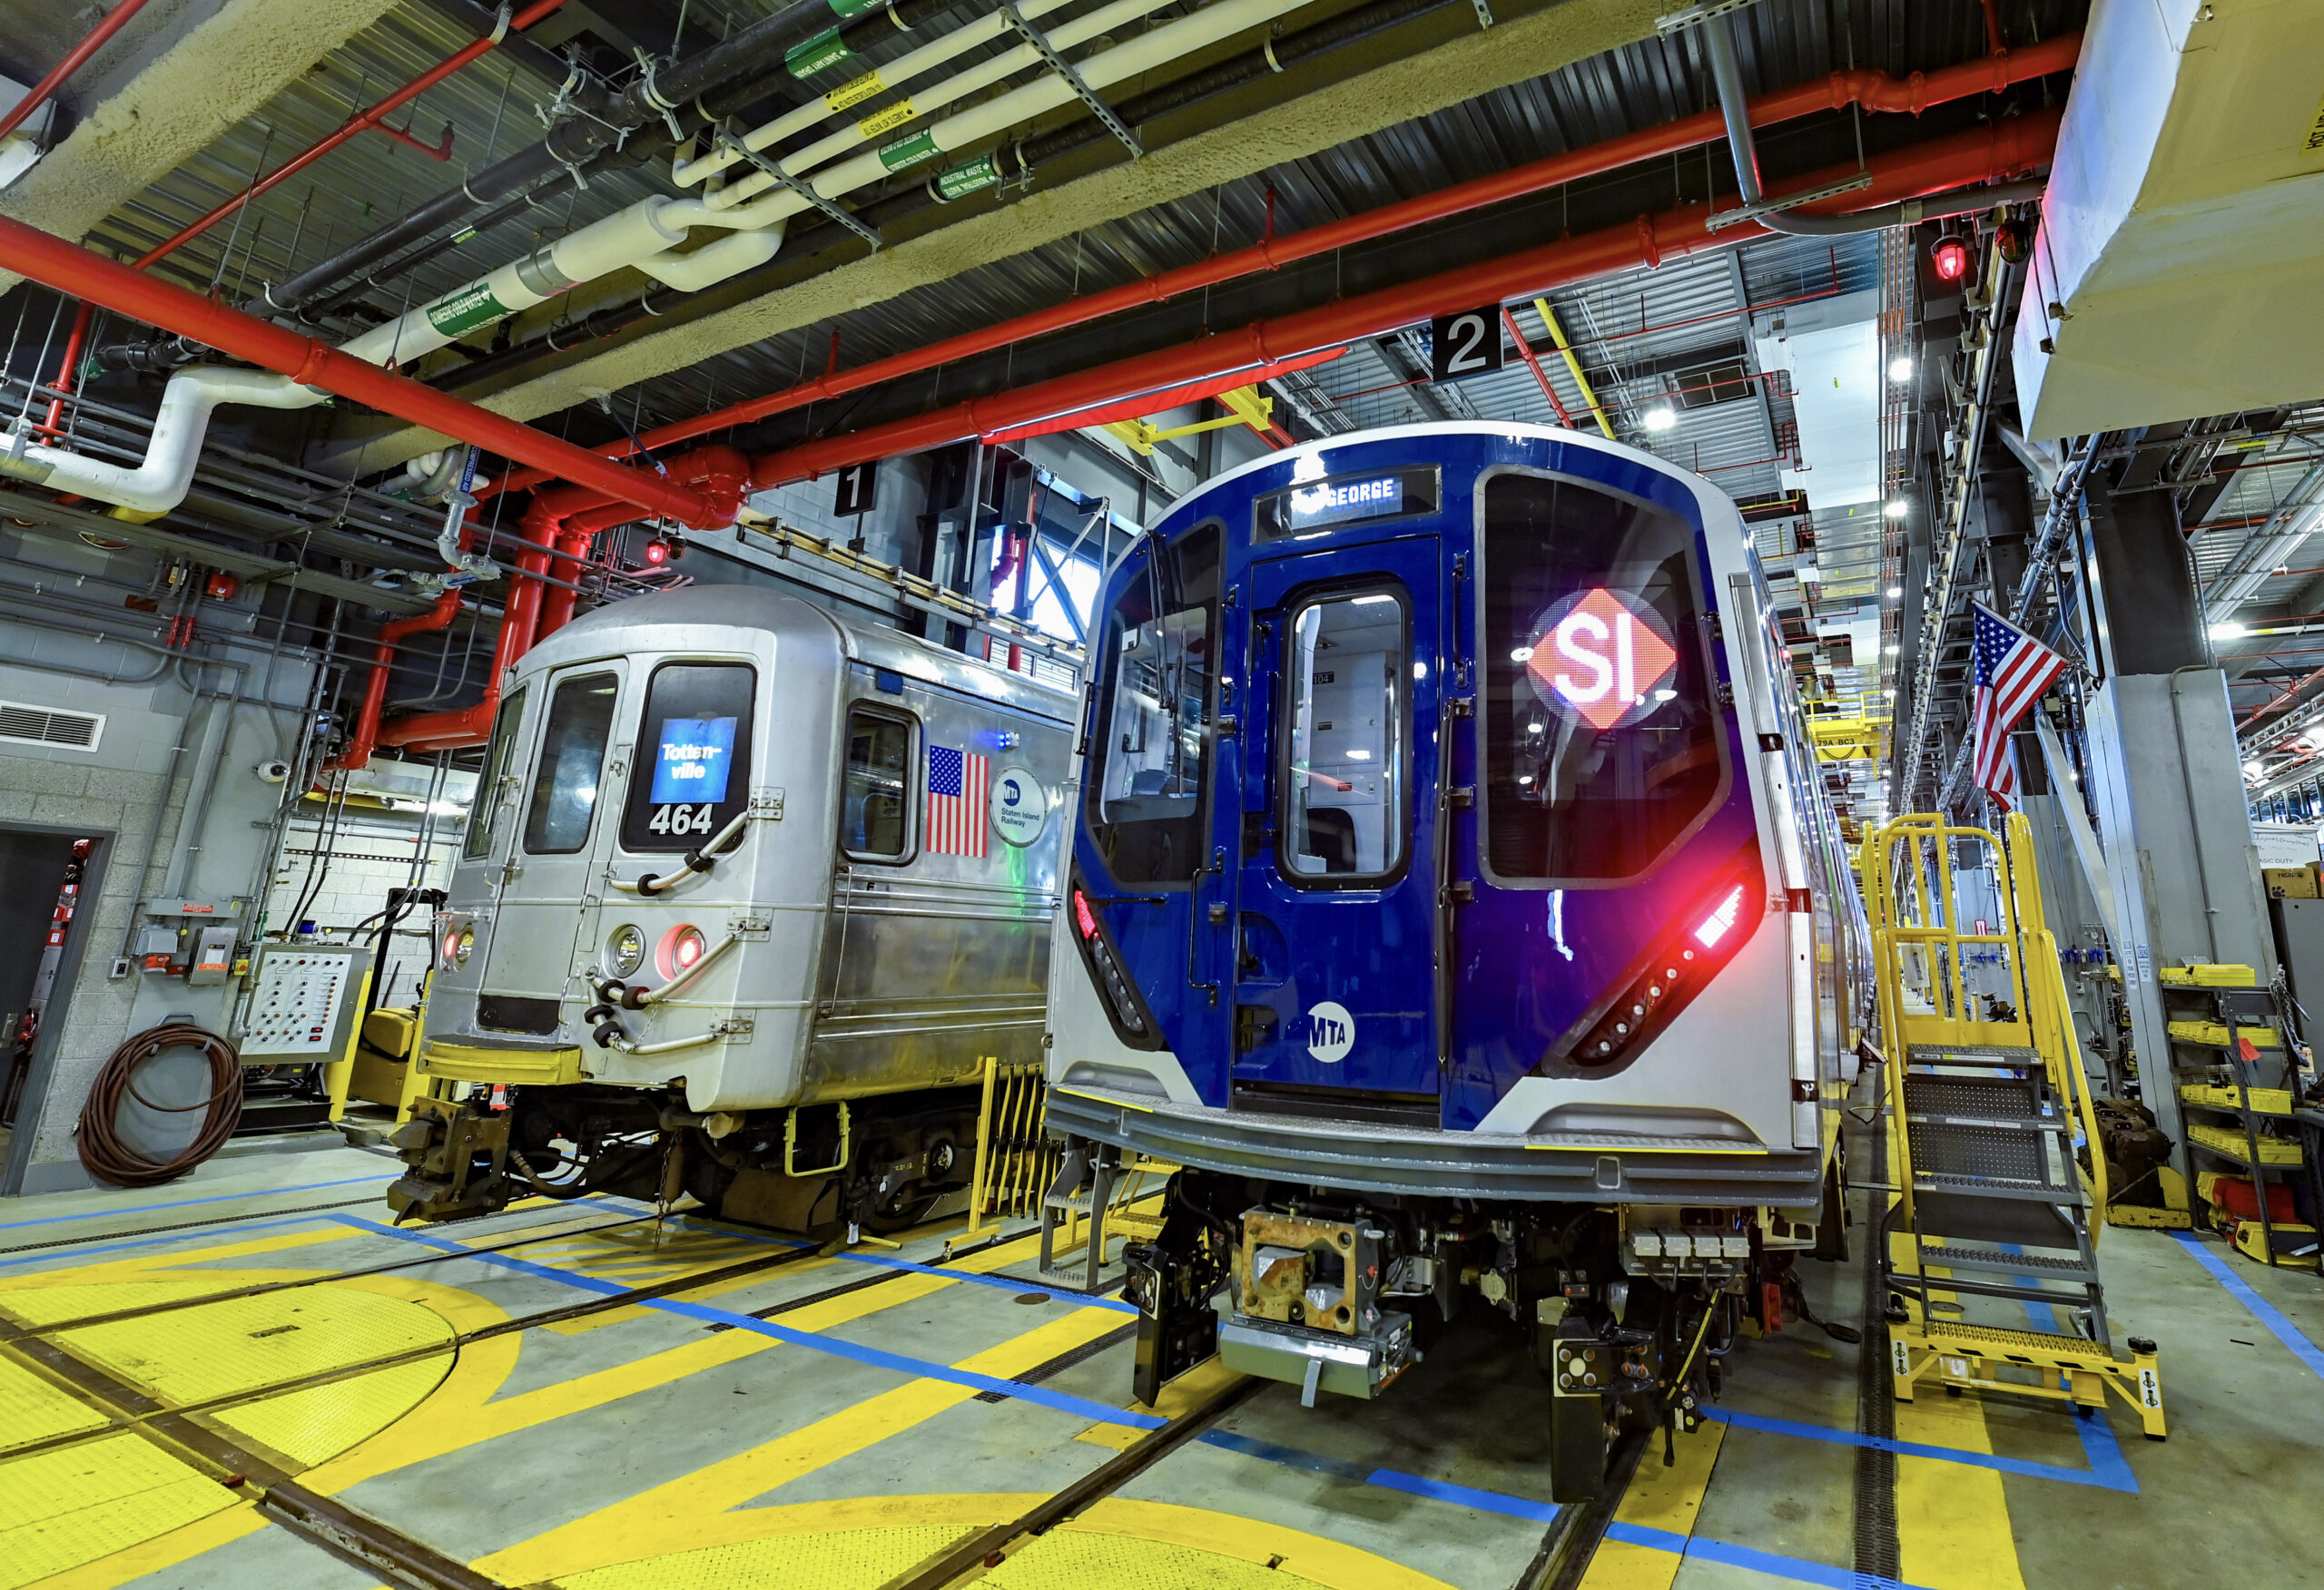 The new subway cars for Staten Island Railway